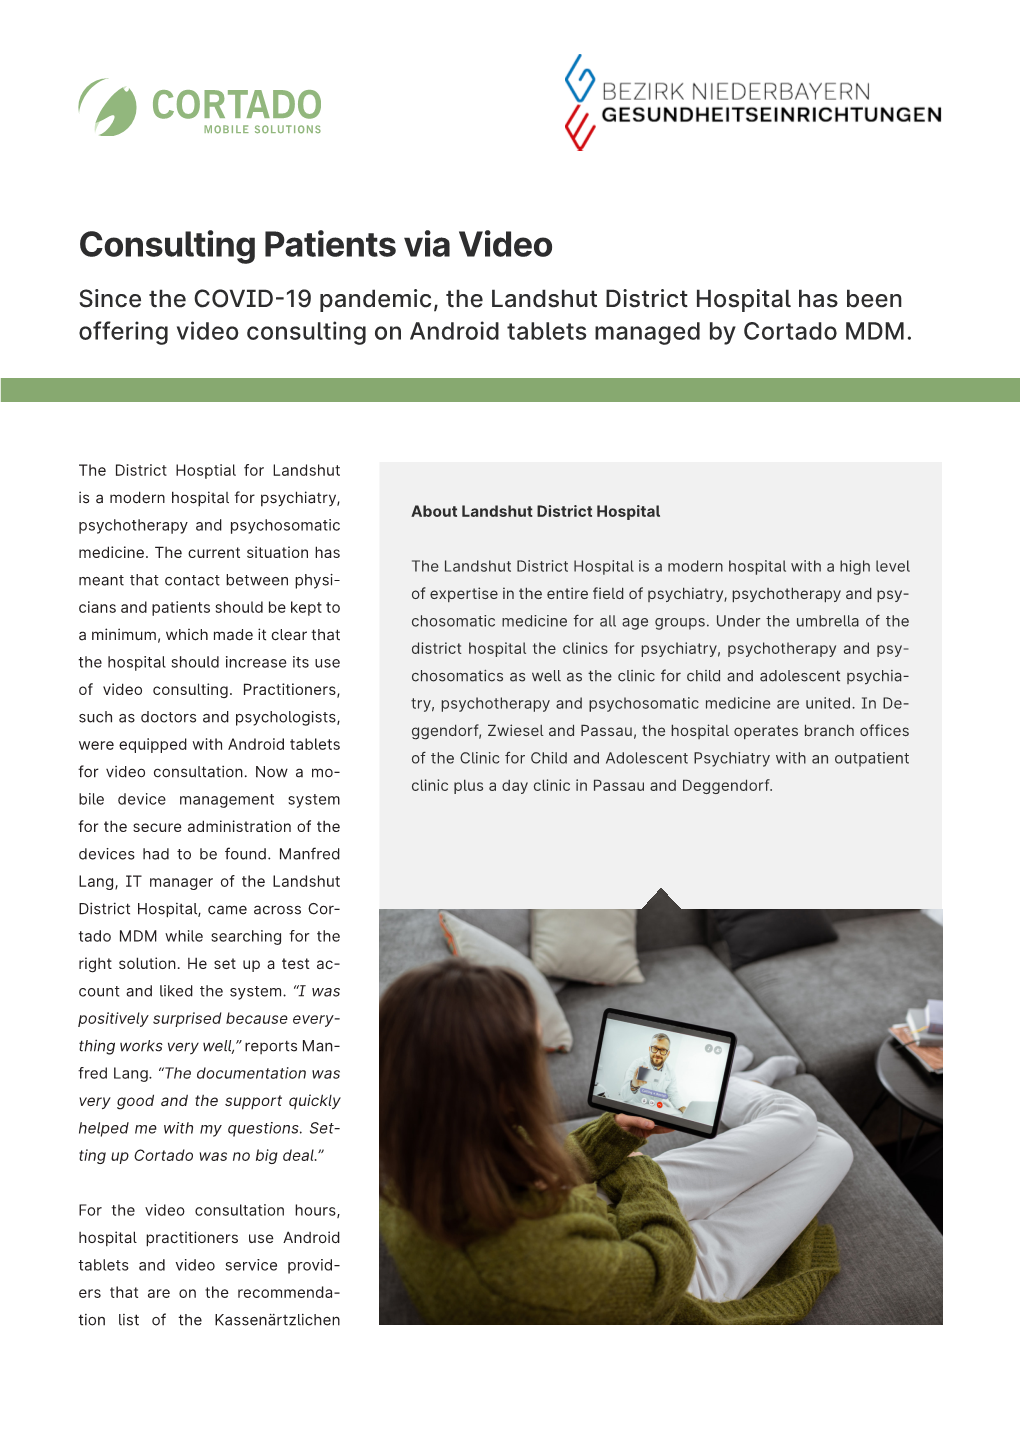 Landshut District Hospital Has Been Offering Video Consulting on Android Tablets Managed by Cortado MDM